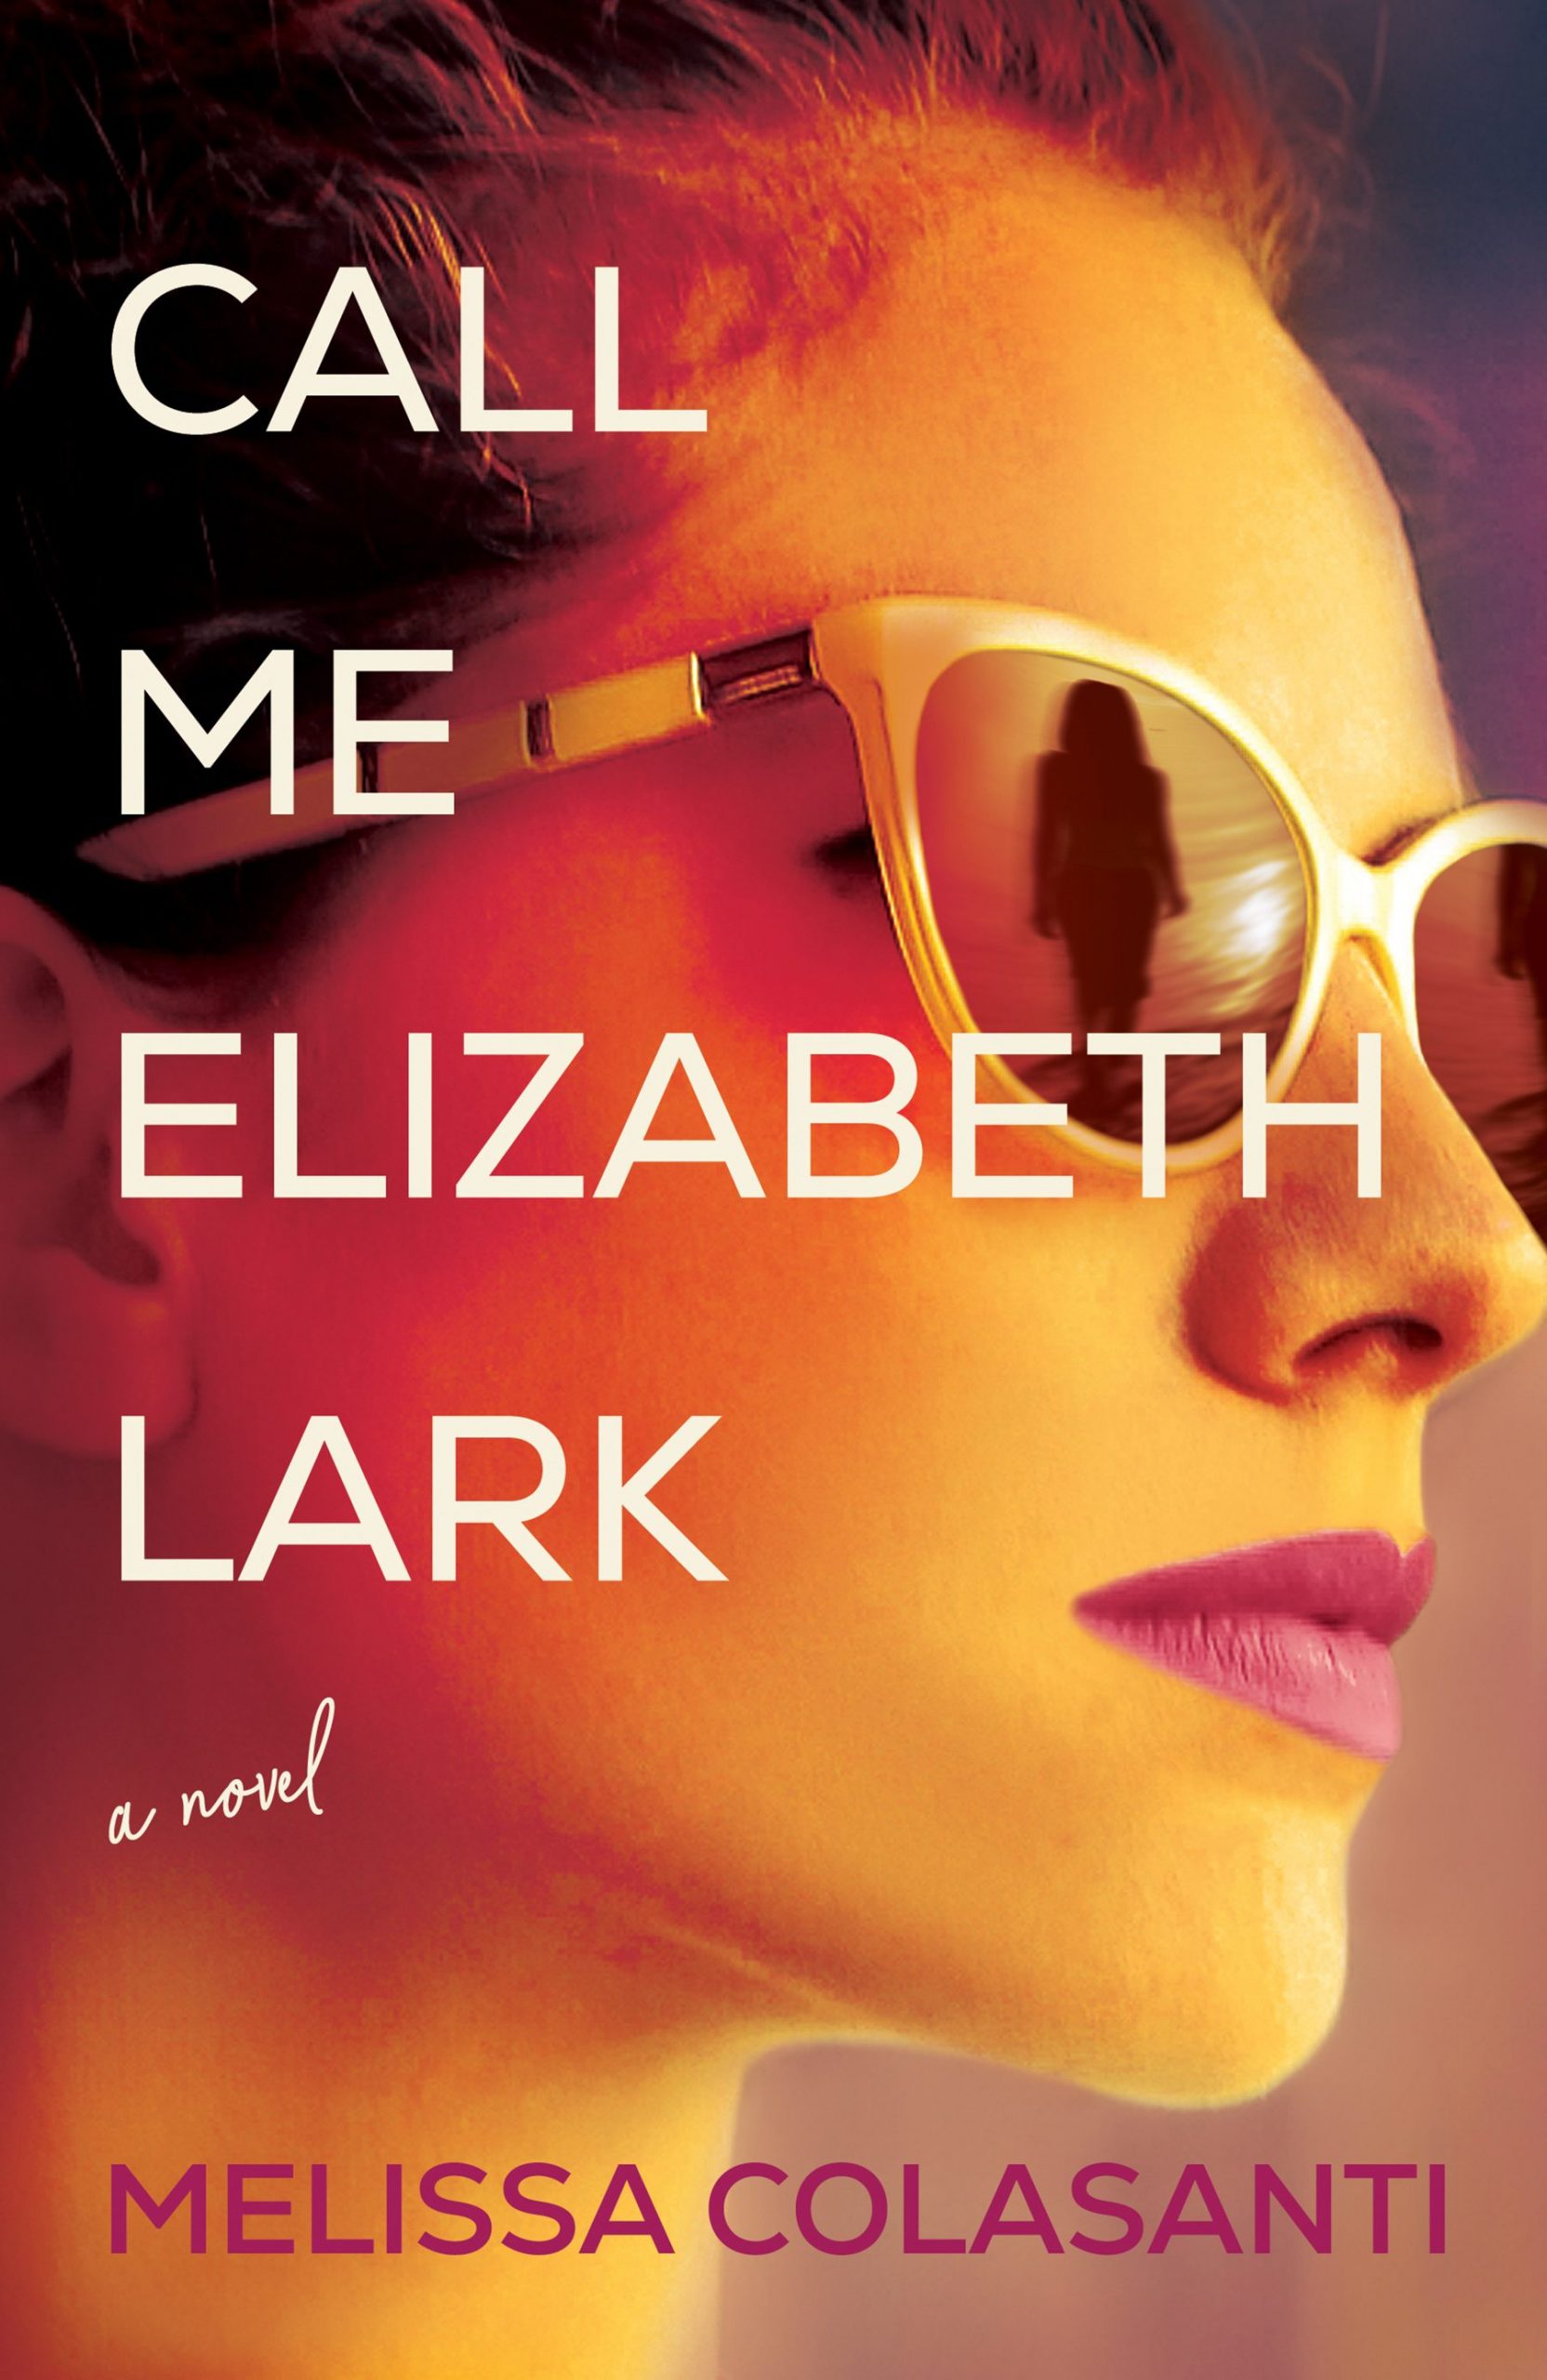 You are currently viewing Call Me Elizabeth Lark by Melissa Colasanti